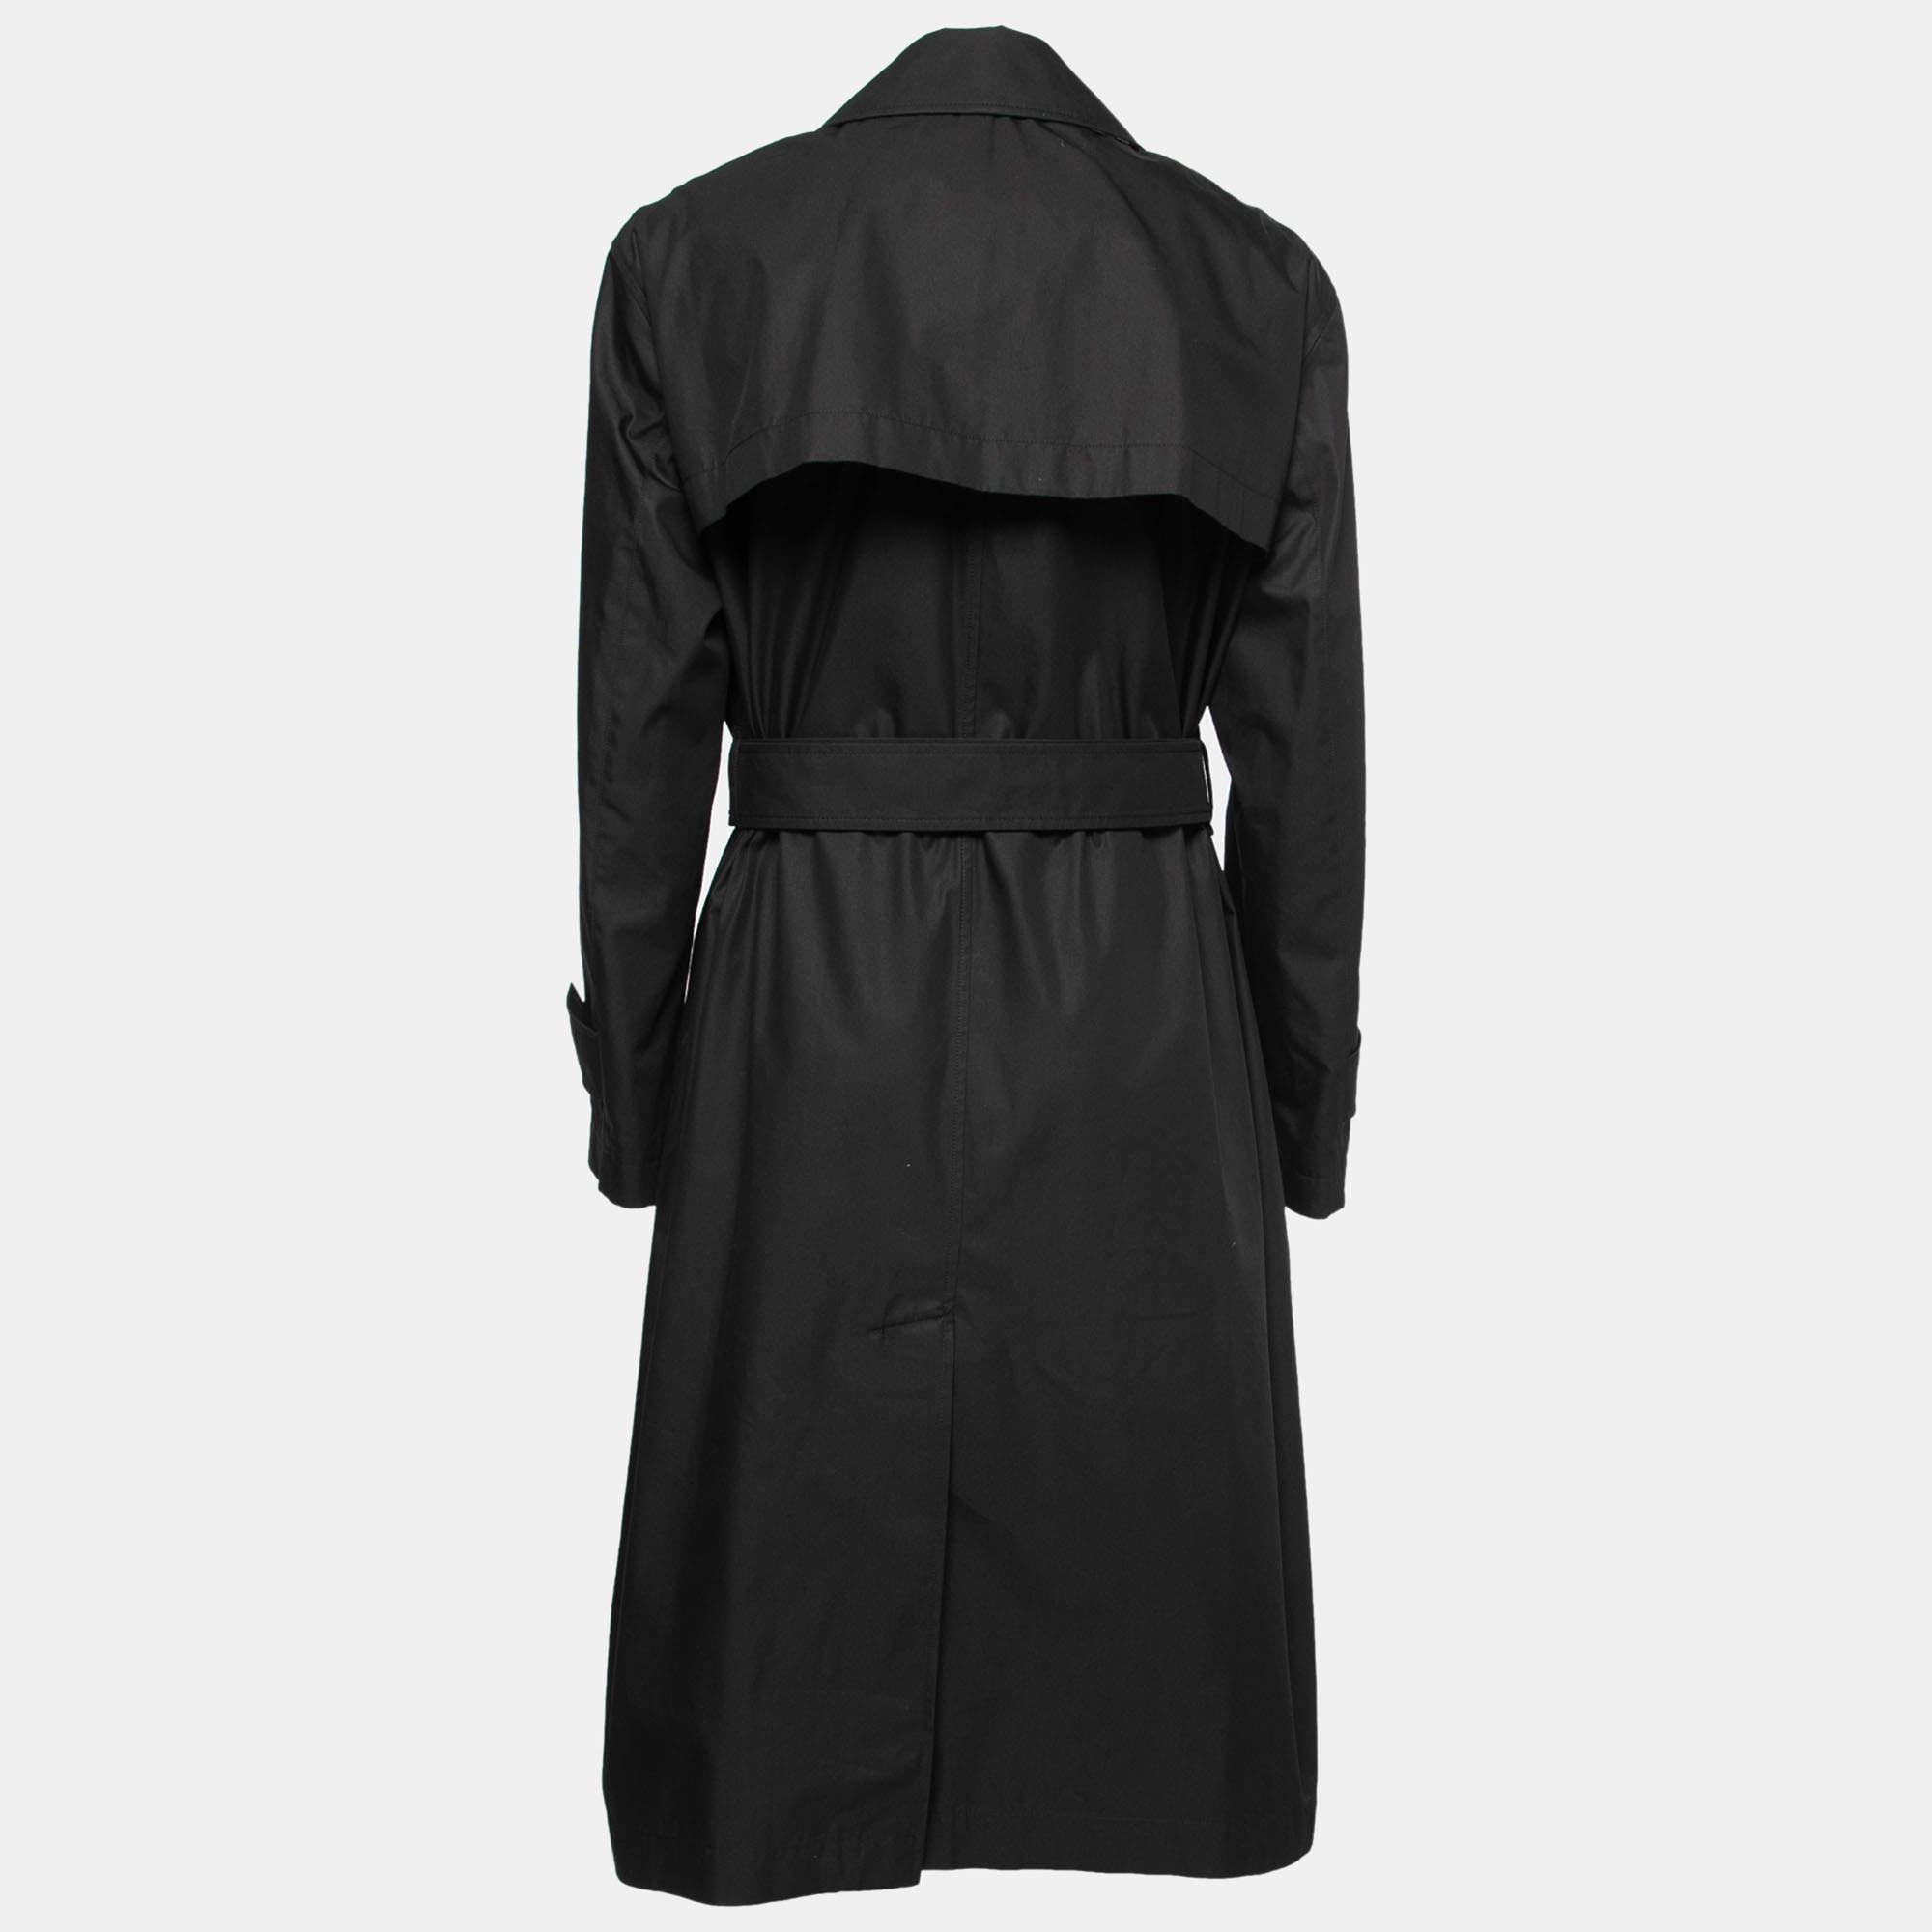 Coats like this one are an amazing accessory to polish your attire. Made from good fabrics and detailed with a noticeable design, this coat ensures your looks are always on point.

Includes: White dust bag, Price Tag, Brand Tag